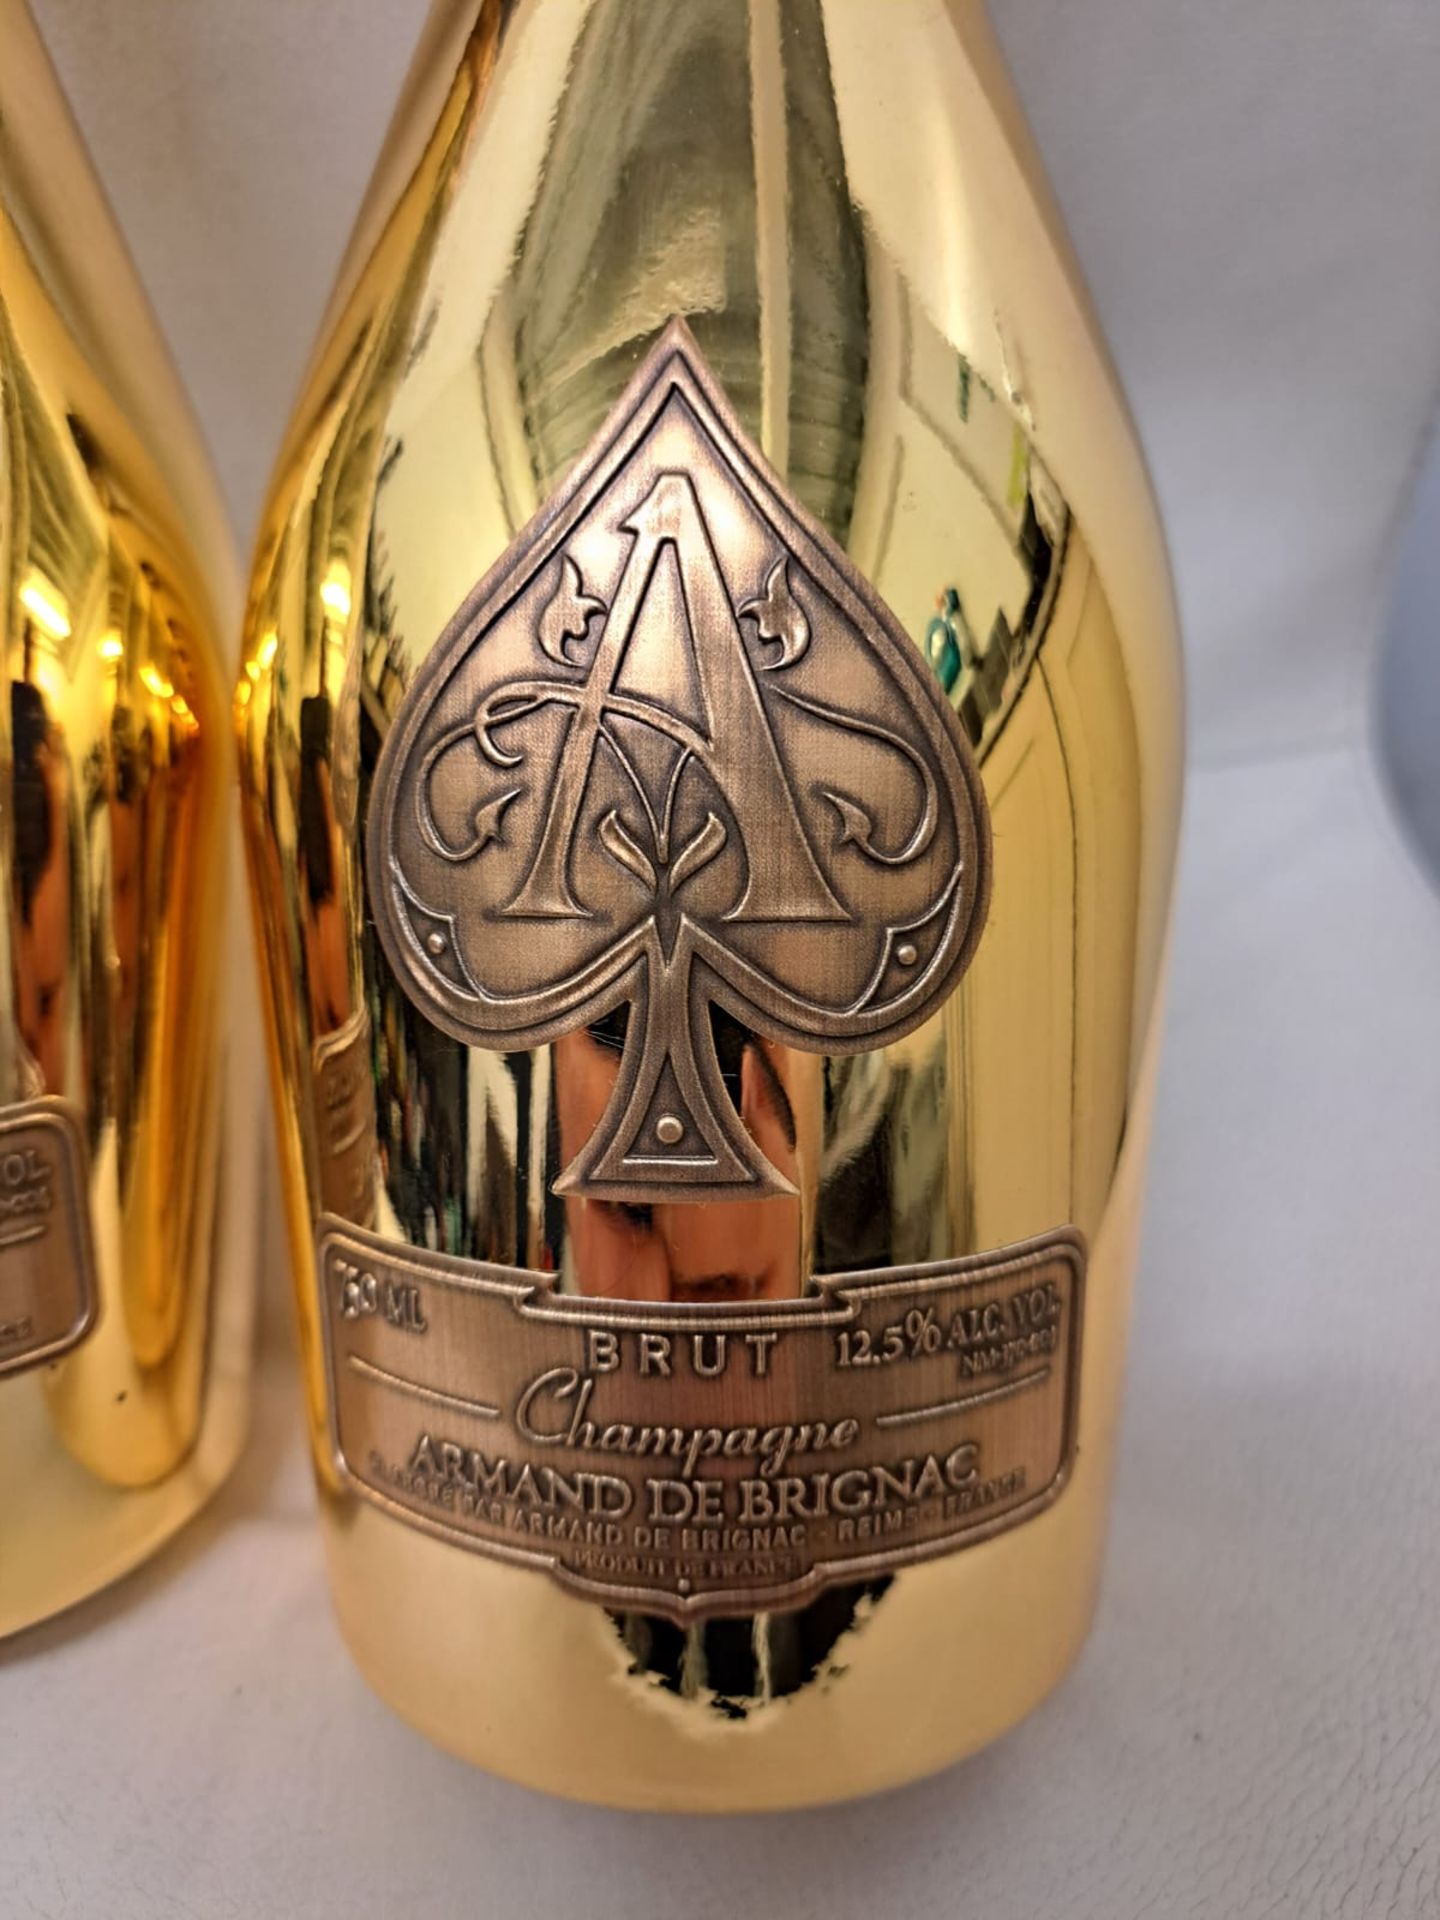 1 x Bottle of Ace Of Spades Gold - Armand De Brignac Brut Gold Champagne - Retail Price £315 - - Image 2 of 2